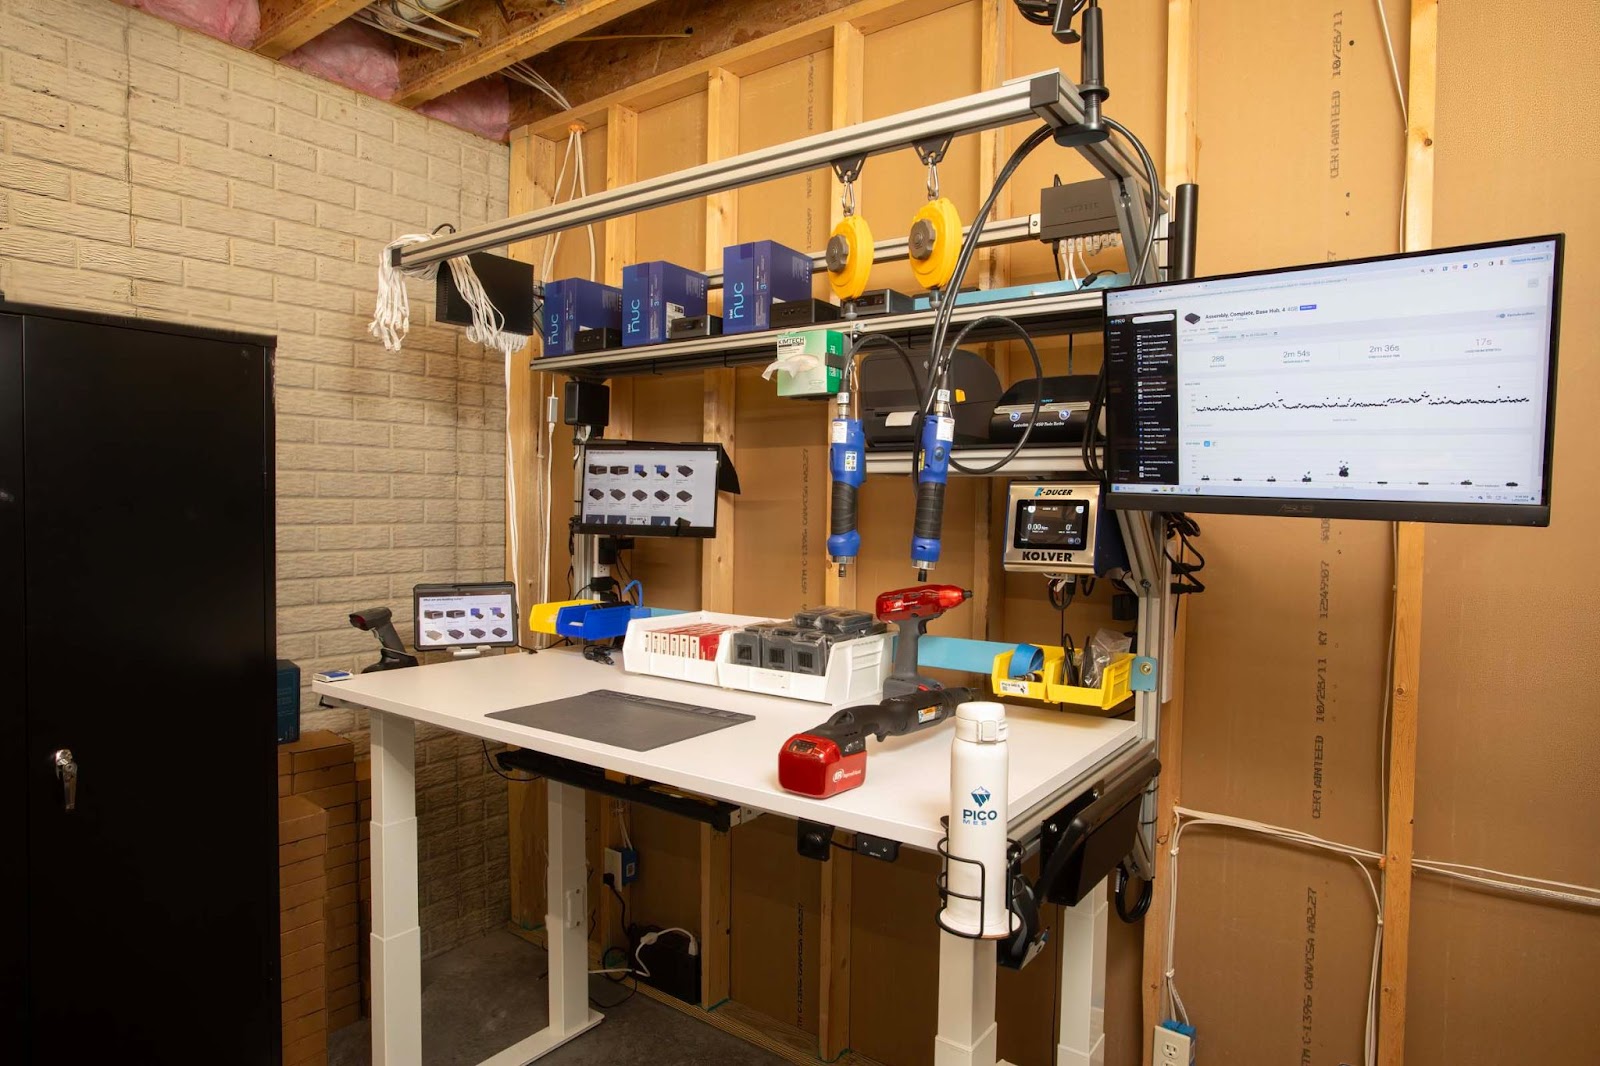 See Pico MES power this workbench with visual worker guidance and connected tools